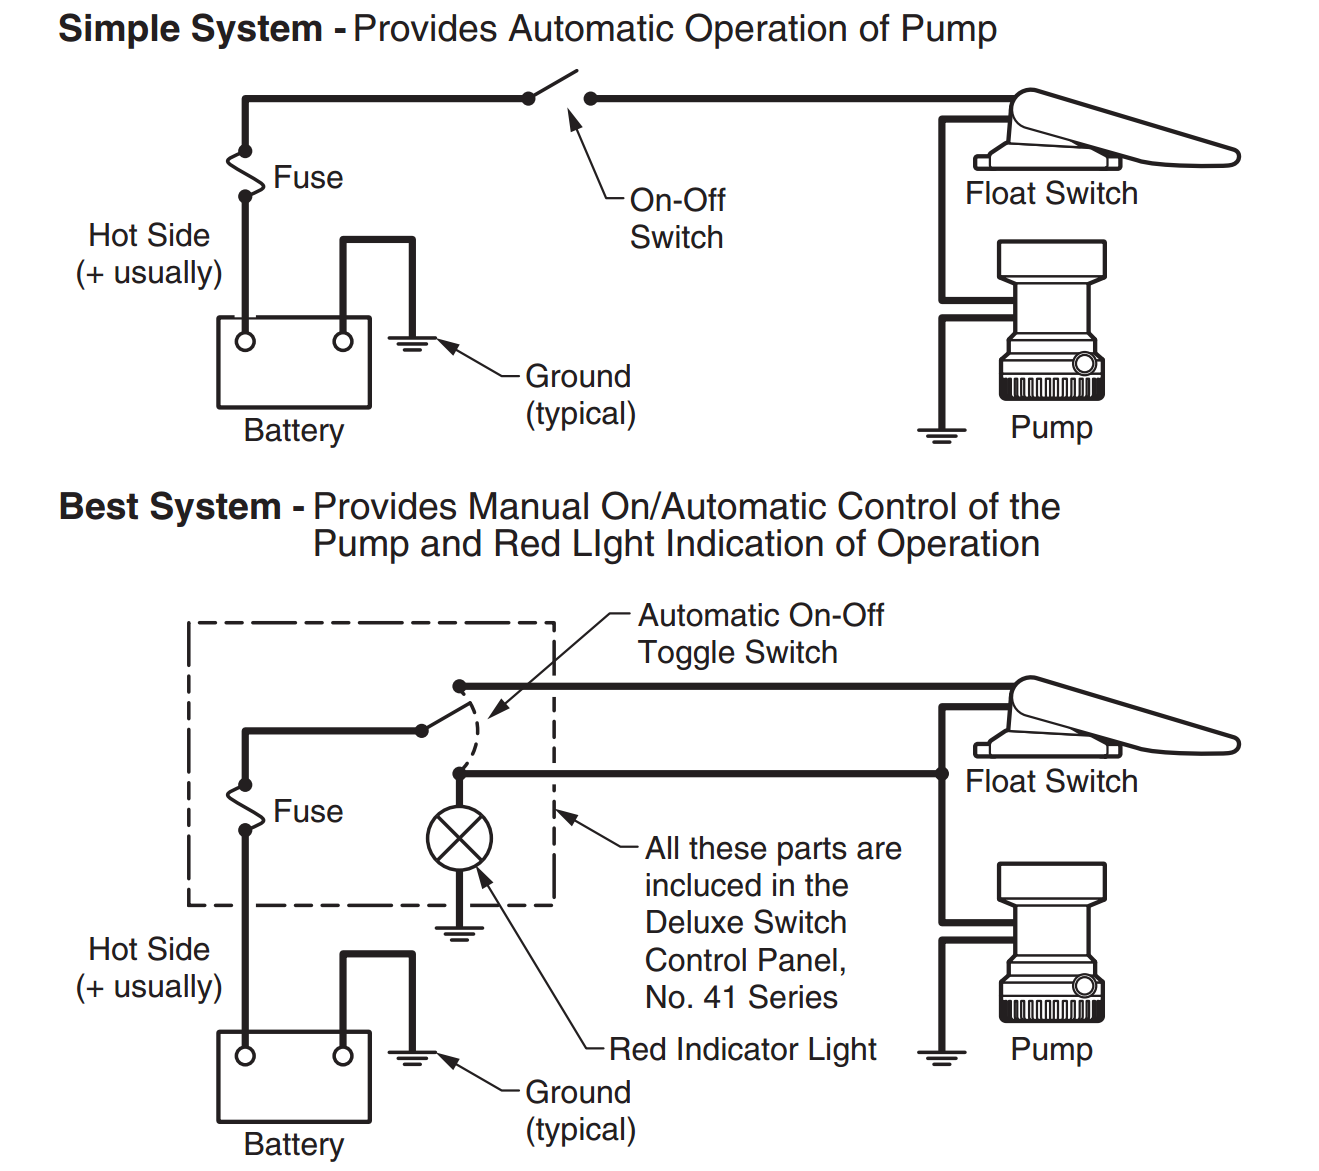 Wiring diagram from the Rule Industries Float Switch manual